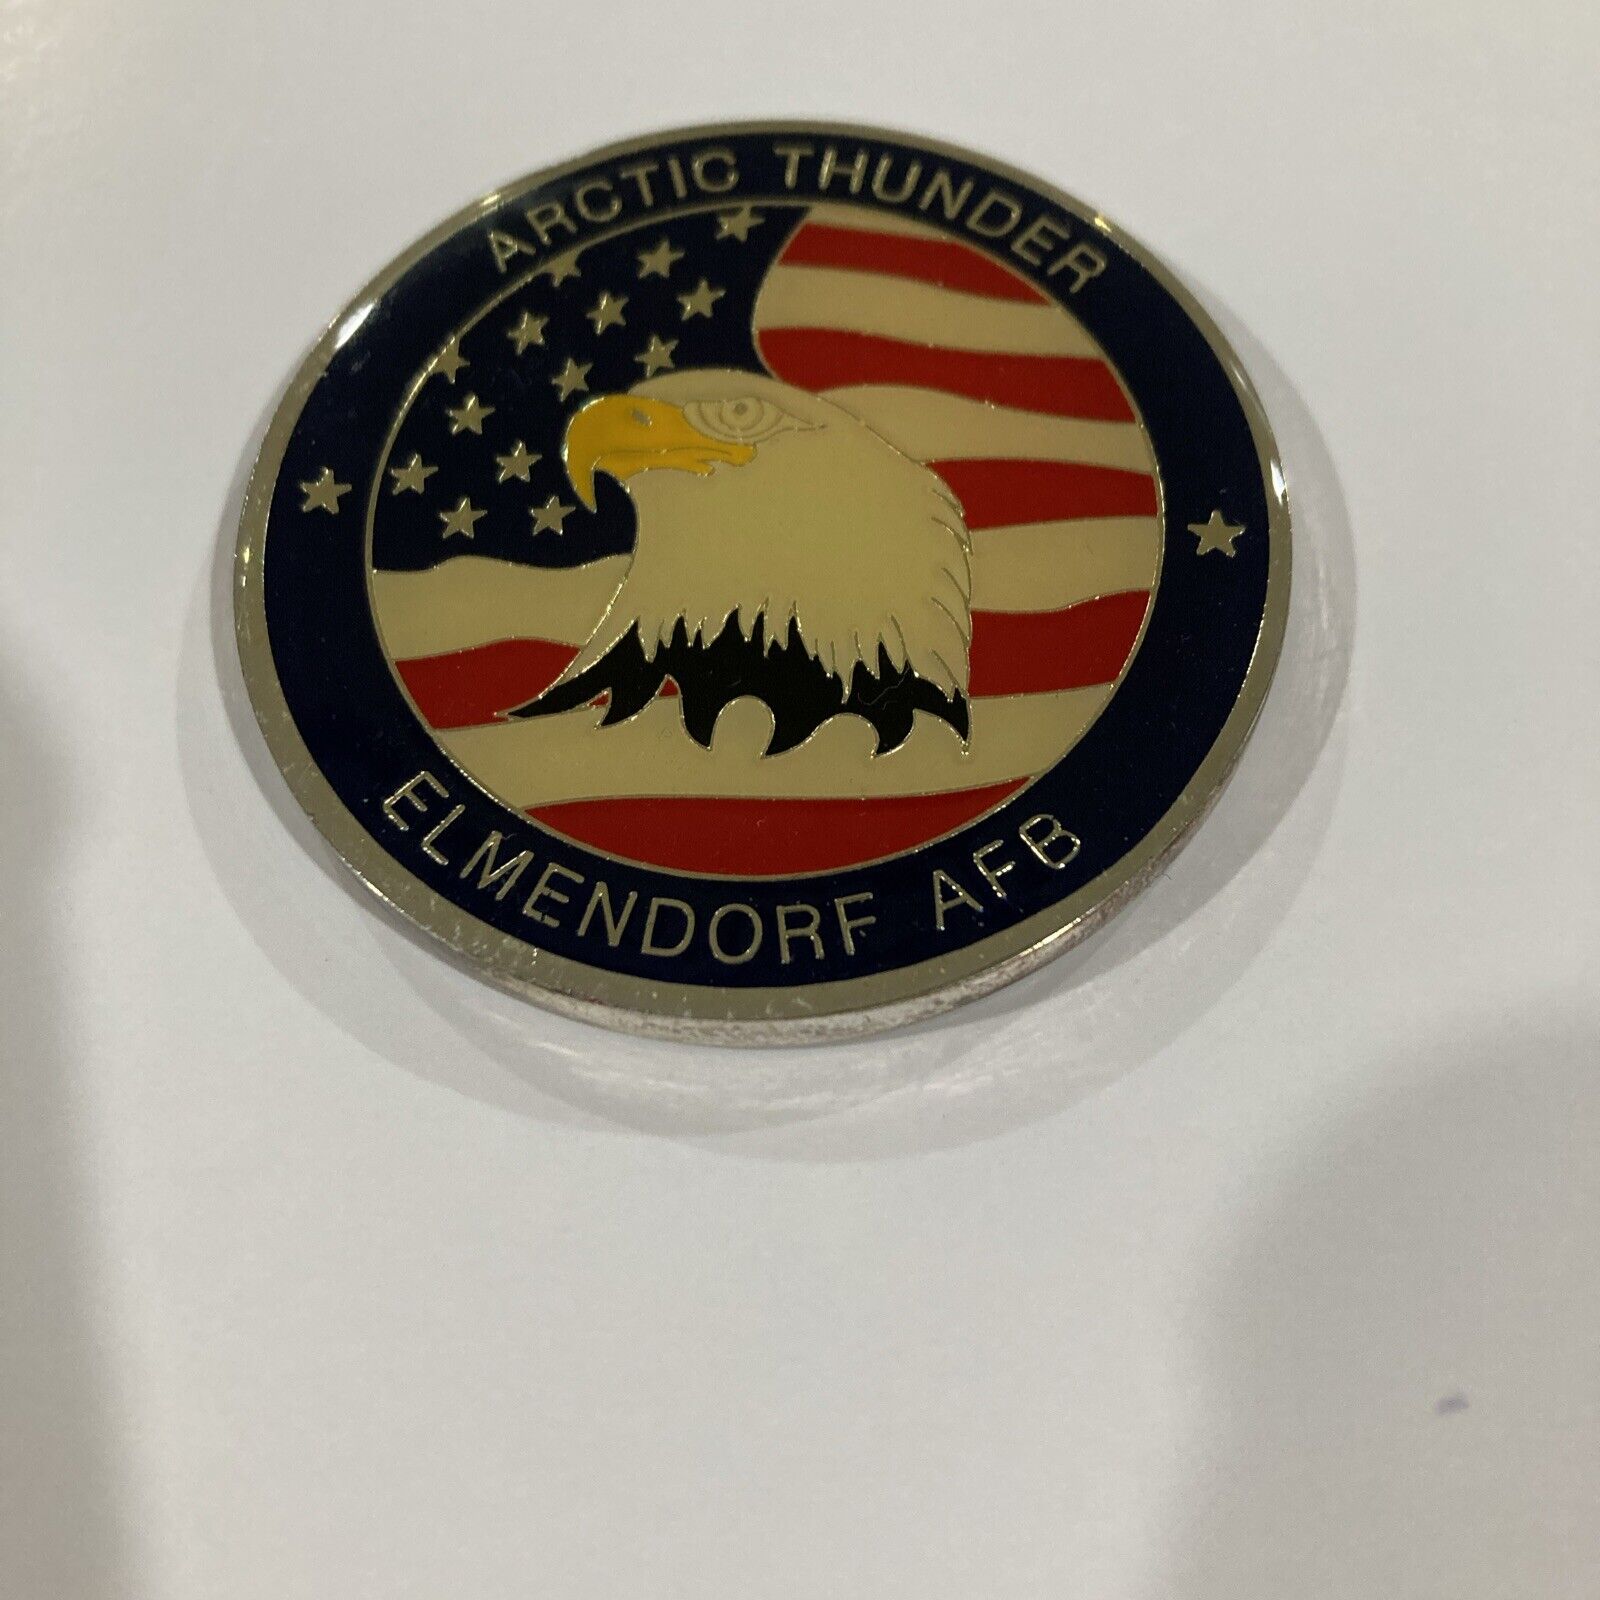 CHALLENGE COIN, Artic Thunder, ~ 2017, Elmendorf AFB, 2.0 In Dia, US Air Force